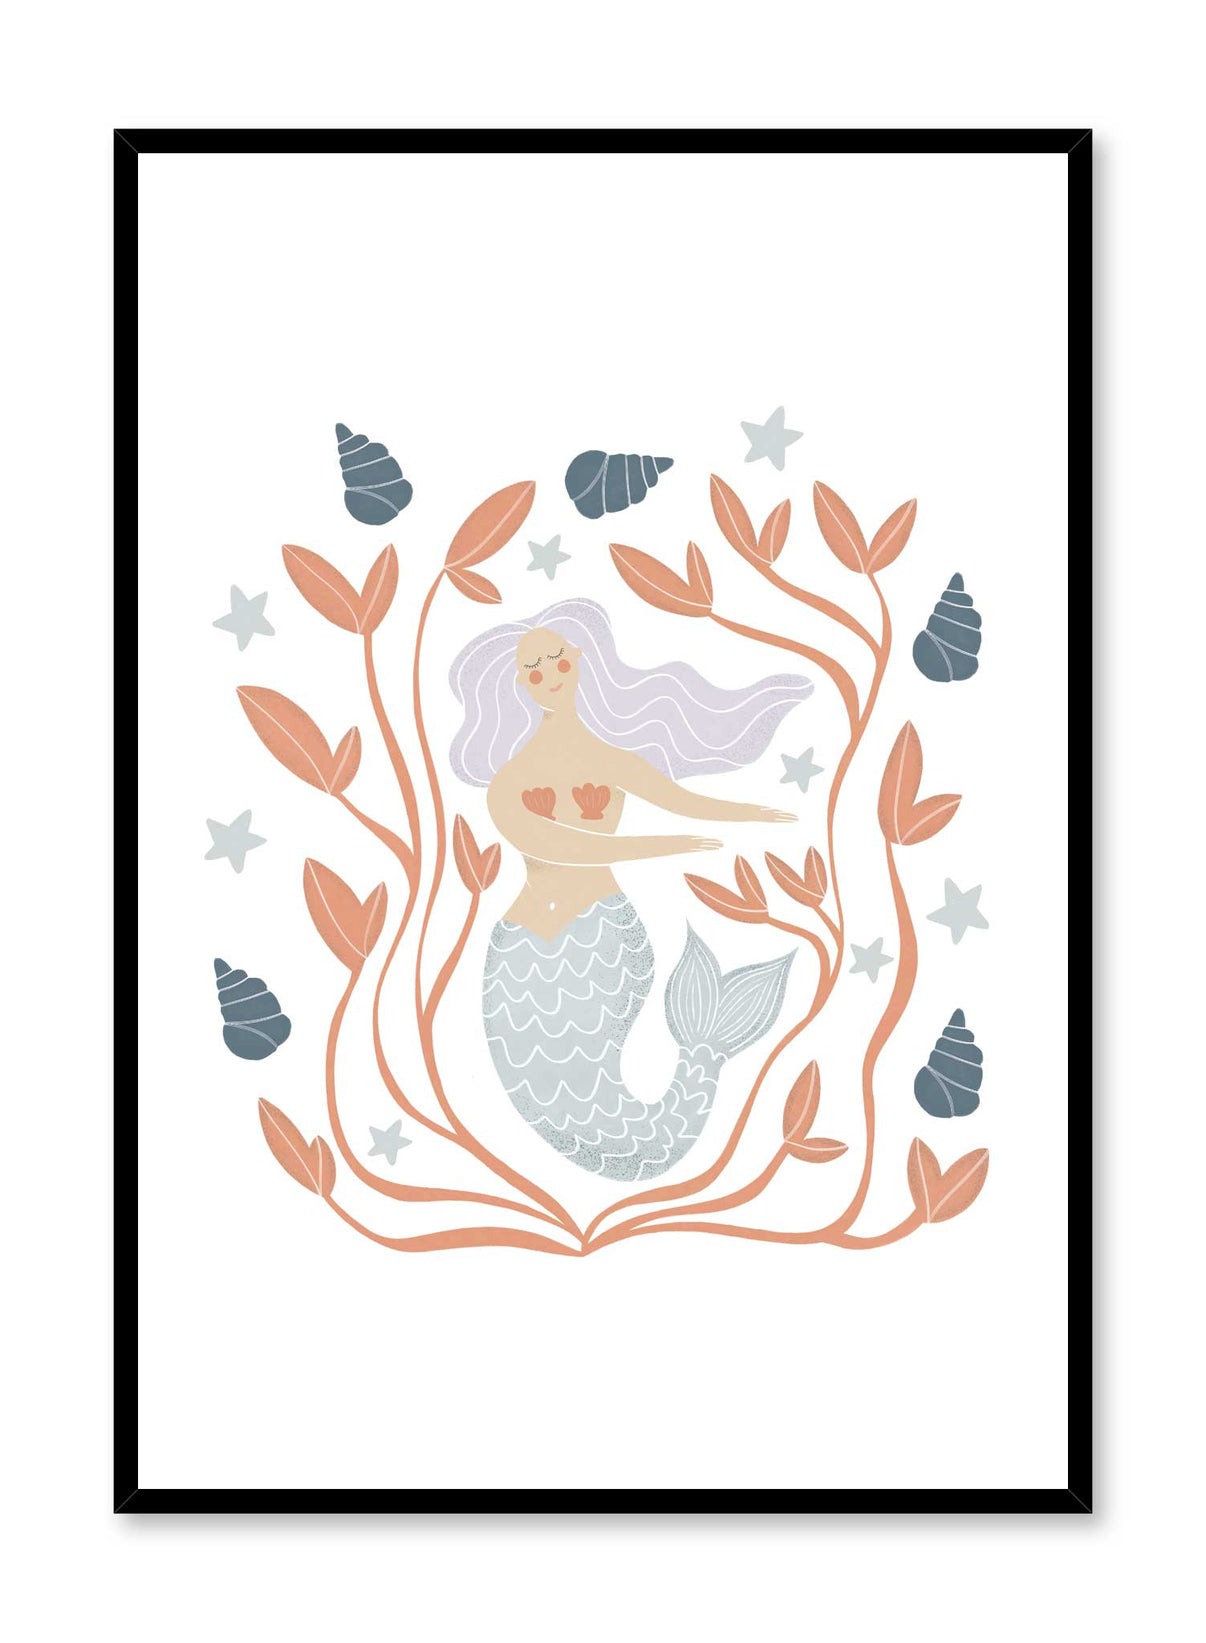 Mermaid | Underwater Mythical Creature Illustration by Opposite Wall